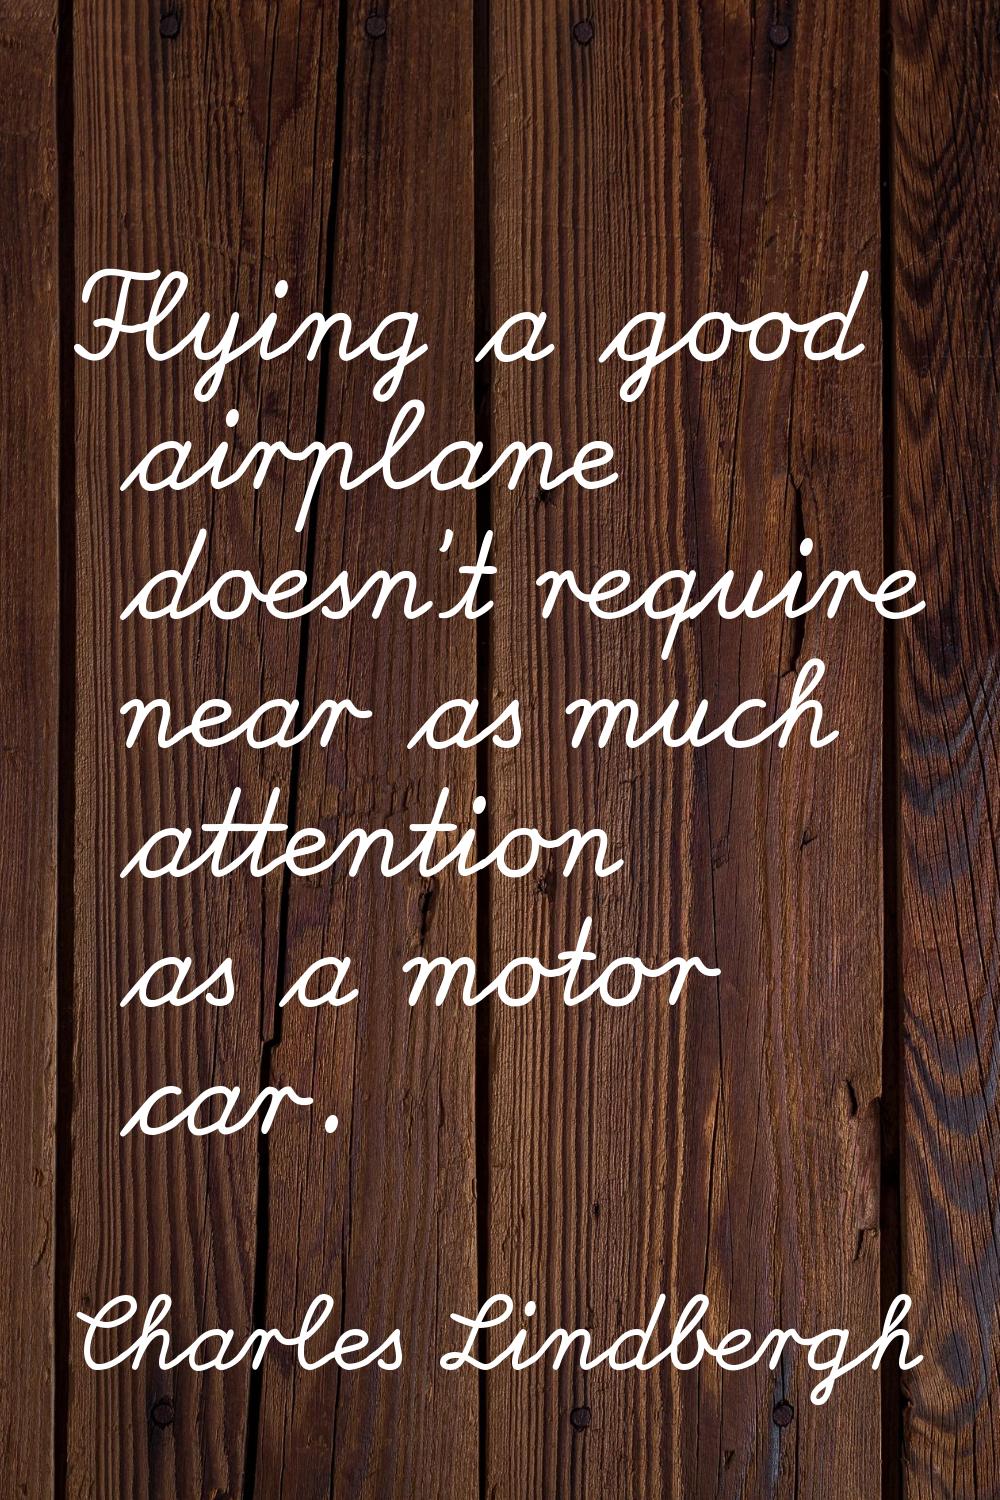 Flying a good airplane doesn't require near as much attention as a motor car.